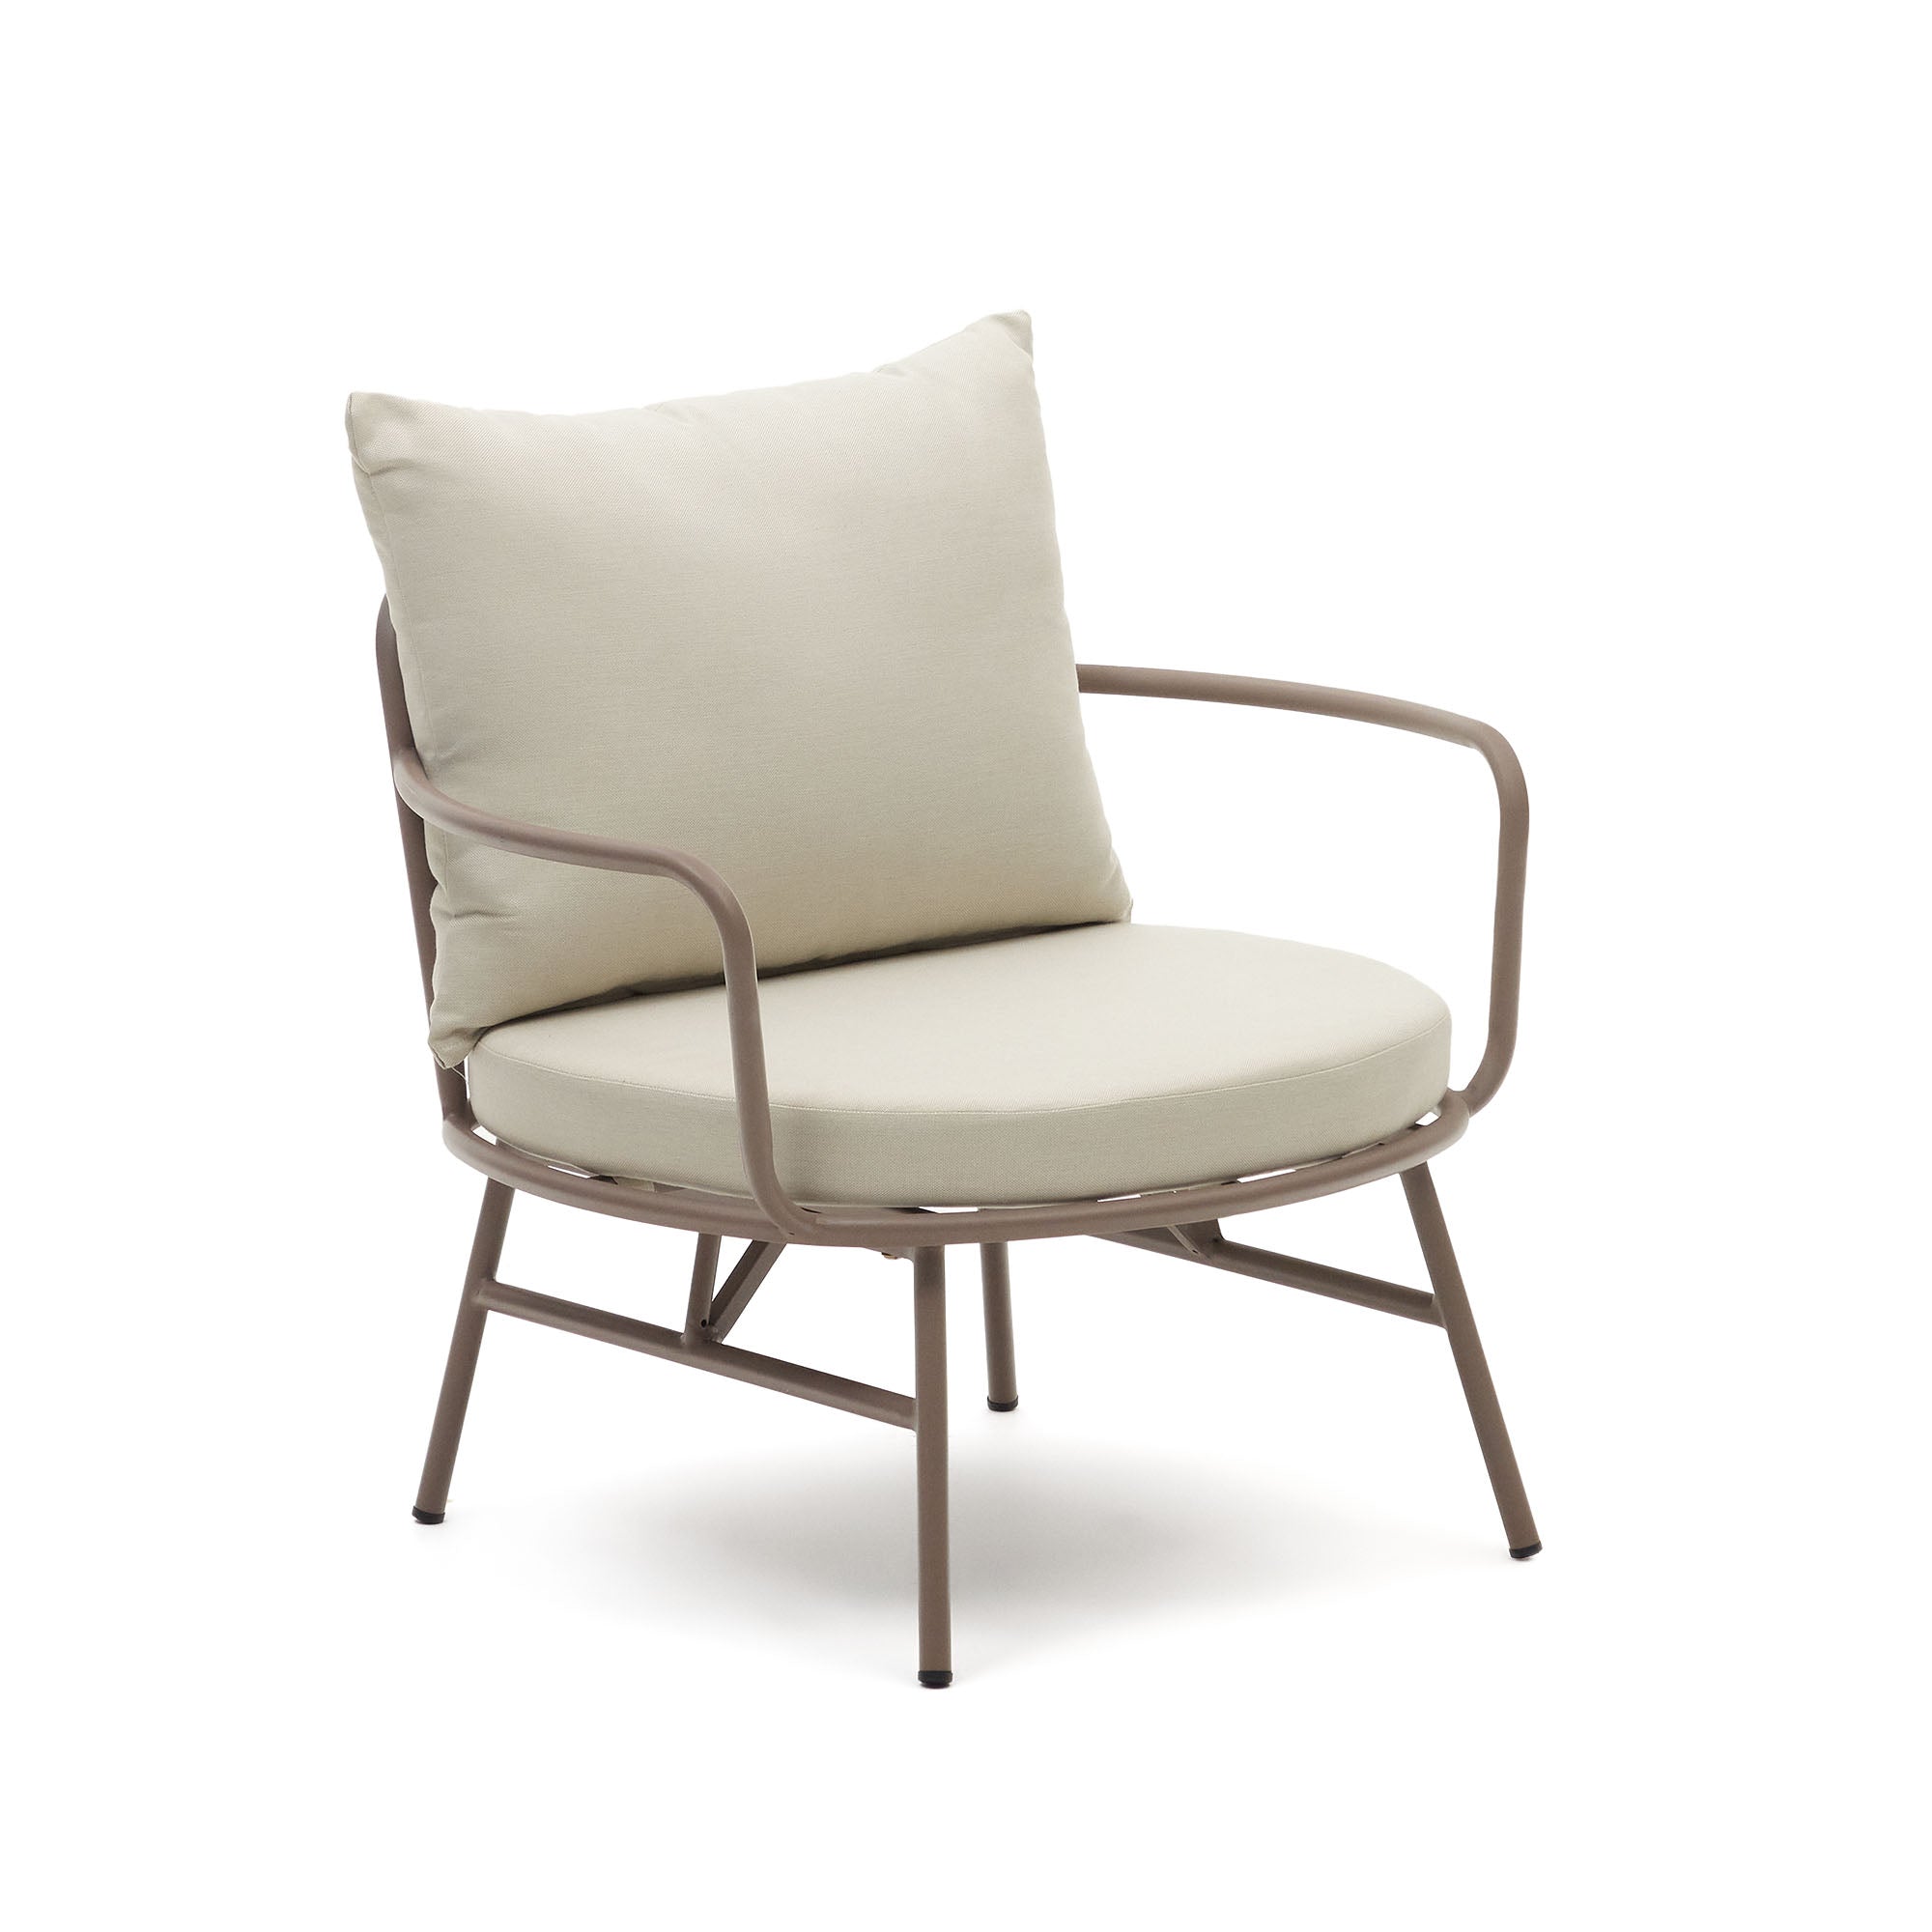 Bramant steel armchair with mauve finish